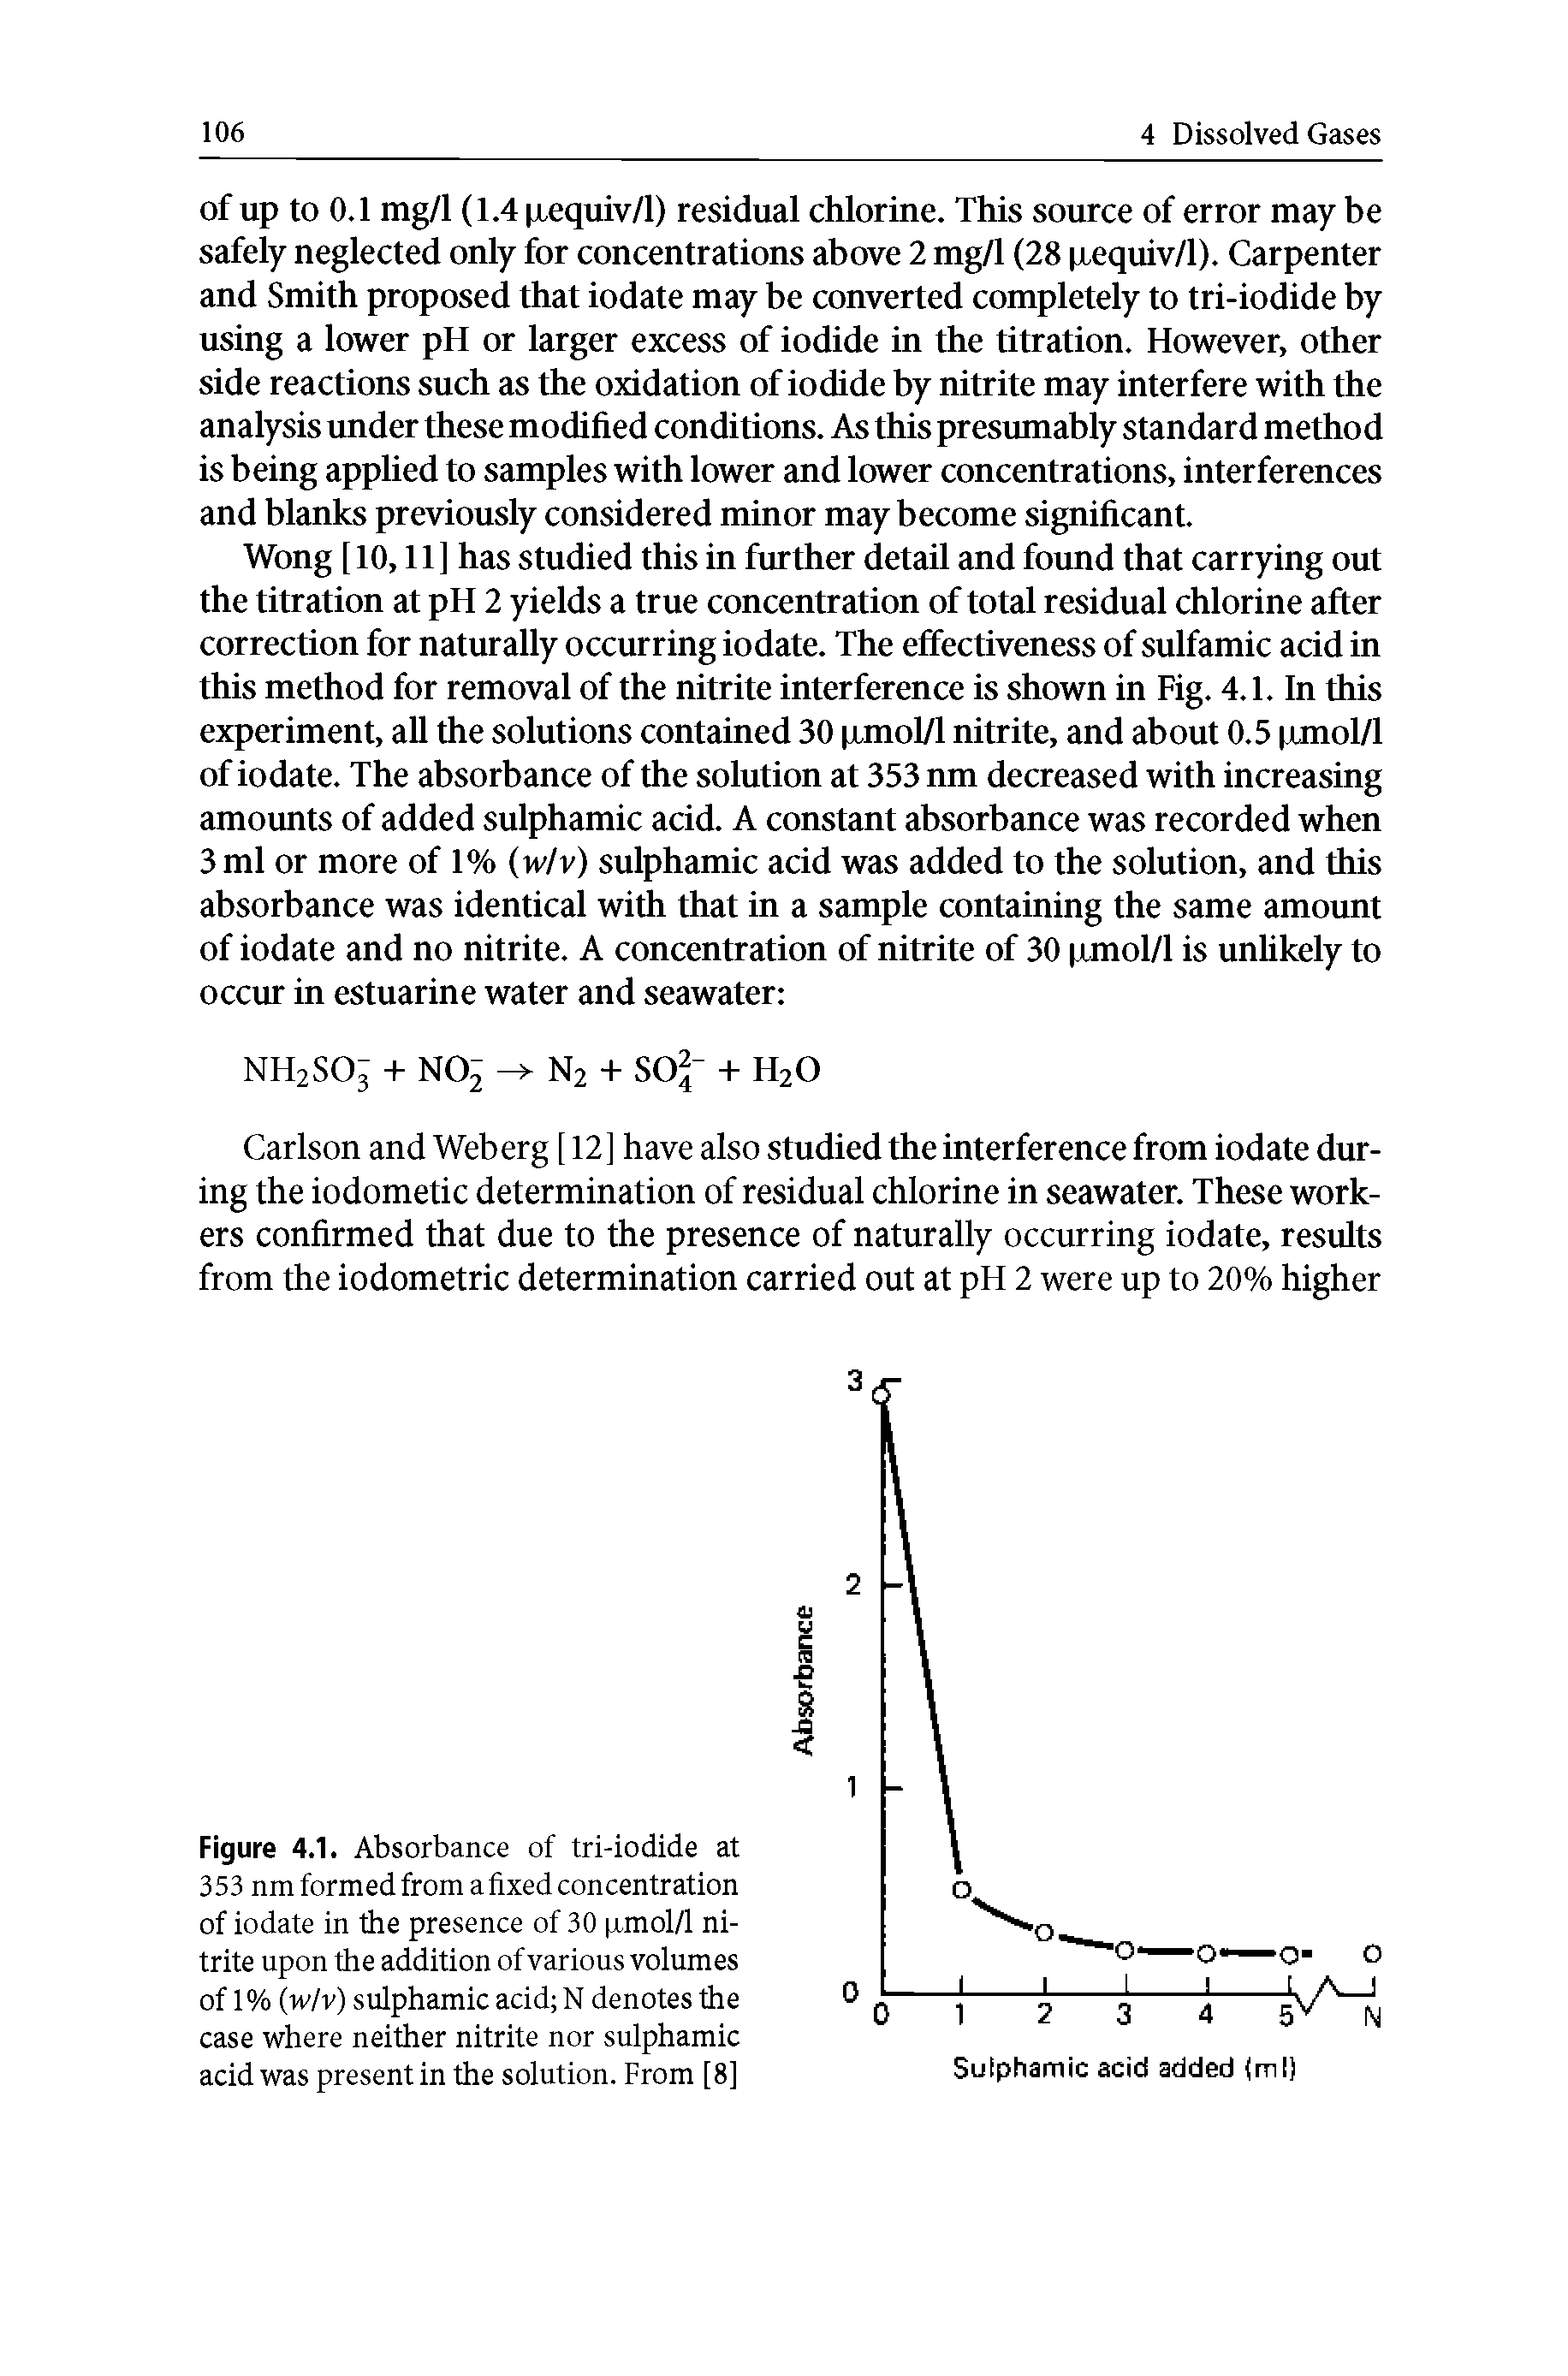 Figure 4.1. Absorbance of tri-iodide at 353 nm formed from a fixed concentration of iodate in the presence of 30 xmol/l nitrite upon the addition of various volumes of 1% (w/v) sulphamic acid N denotes the case where neither nitrite nor sulphamic acid was present in the solution. From [8]...